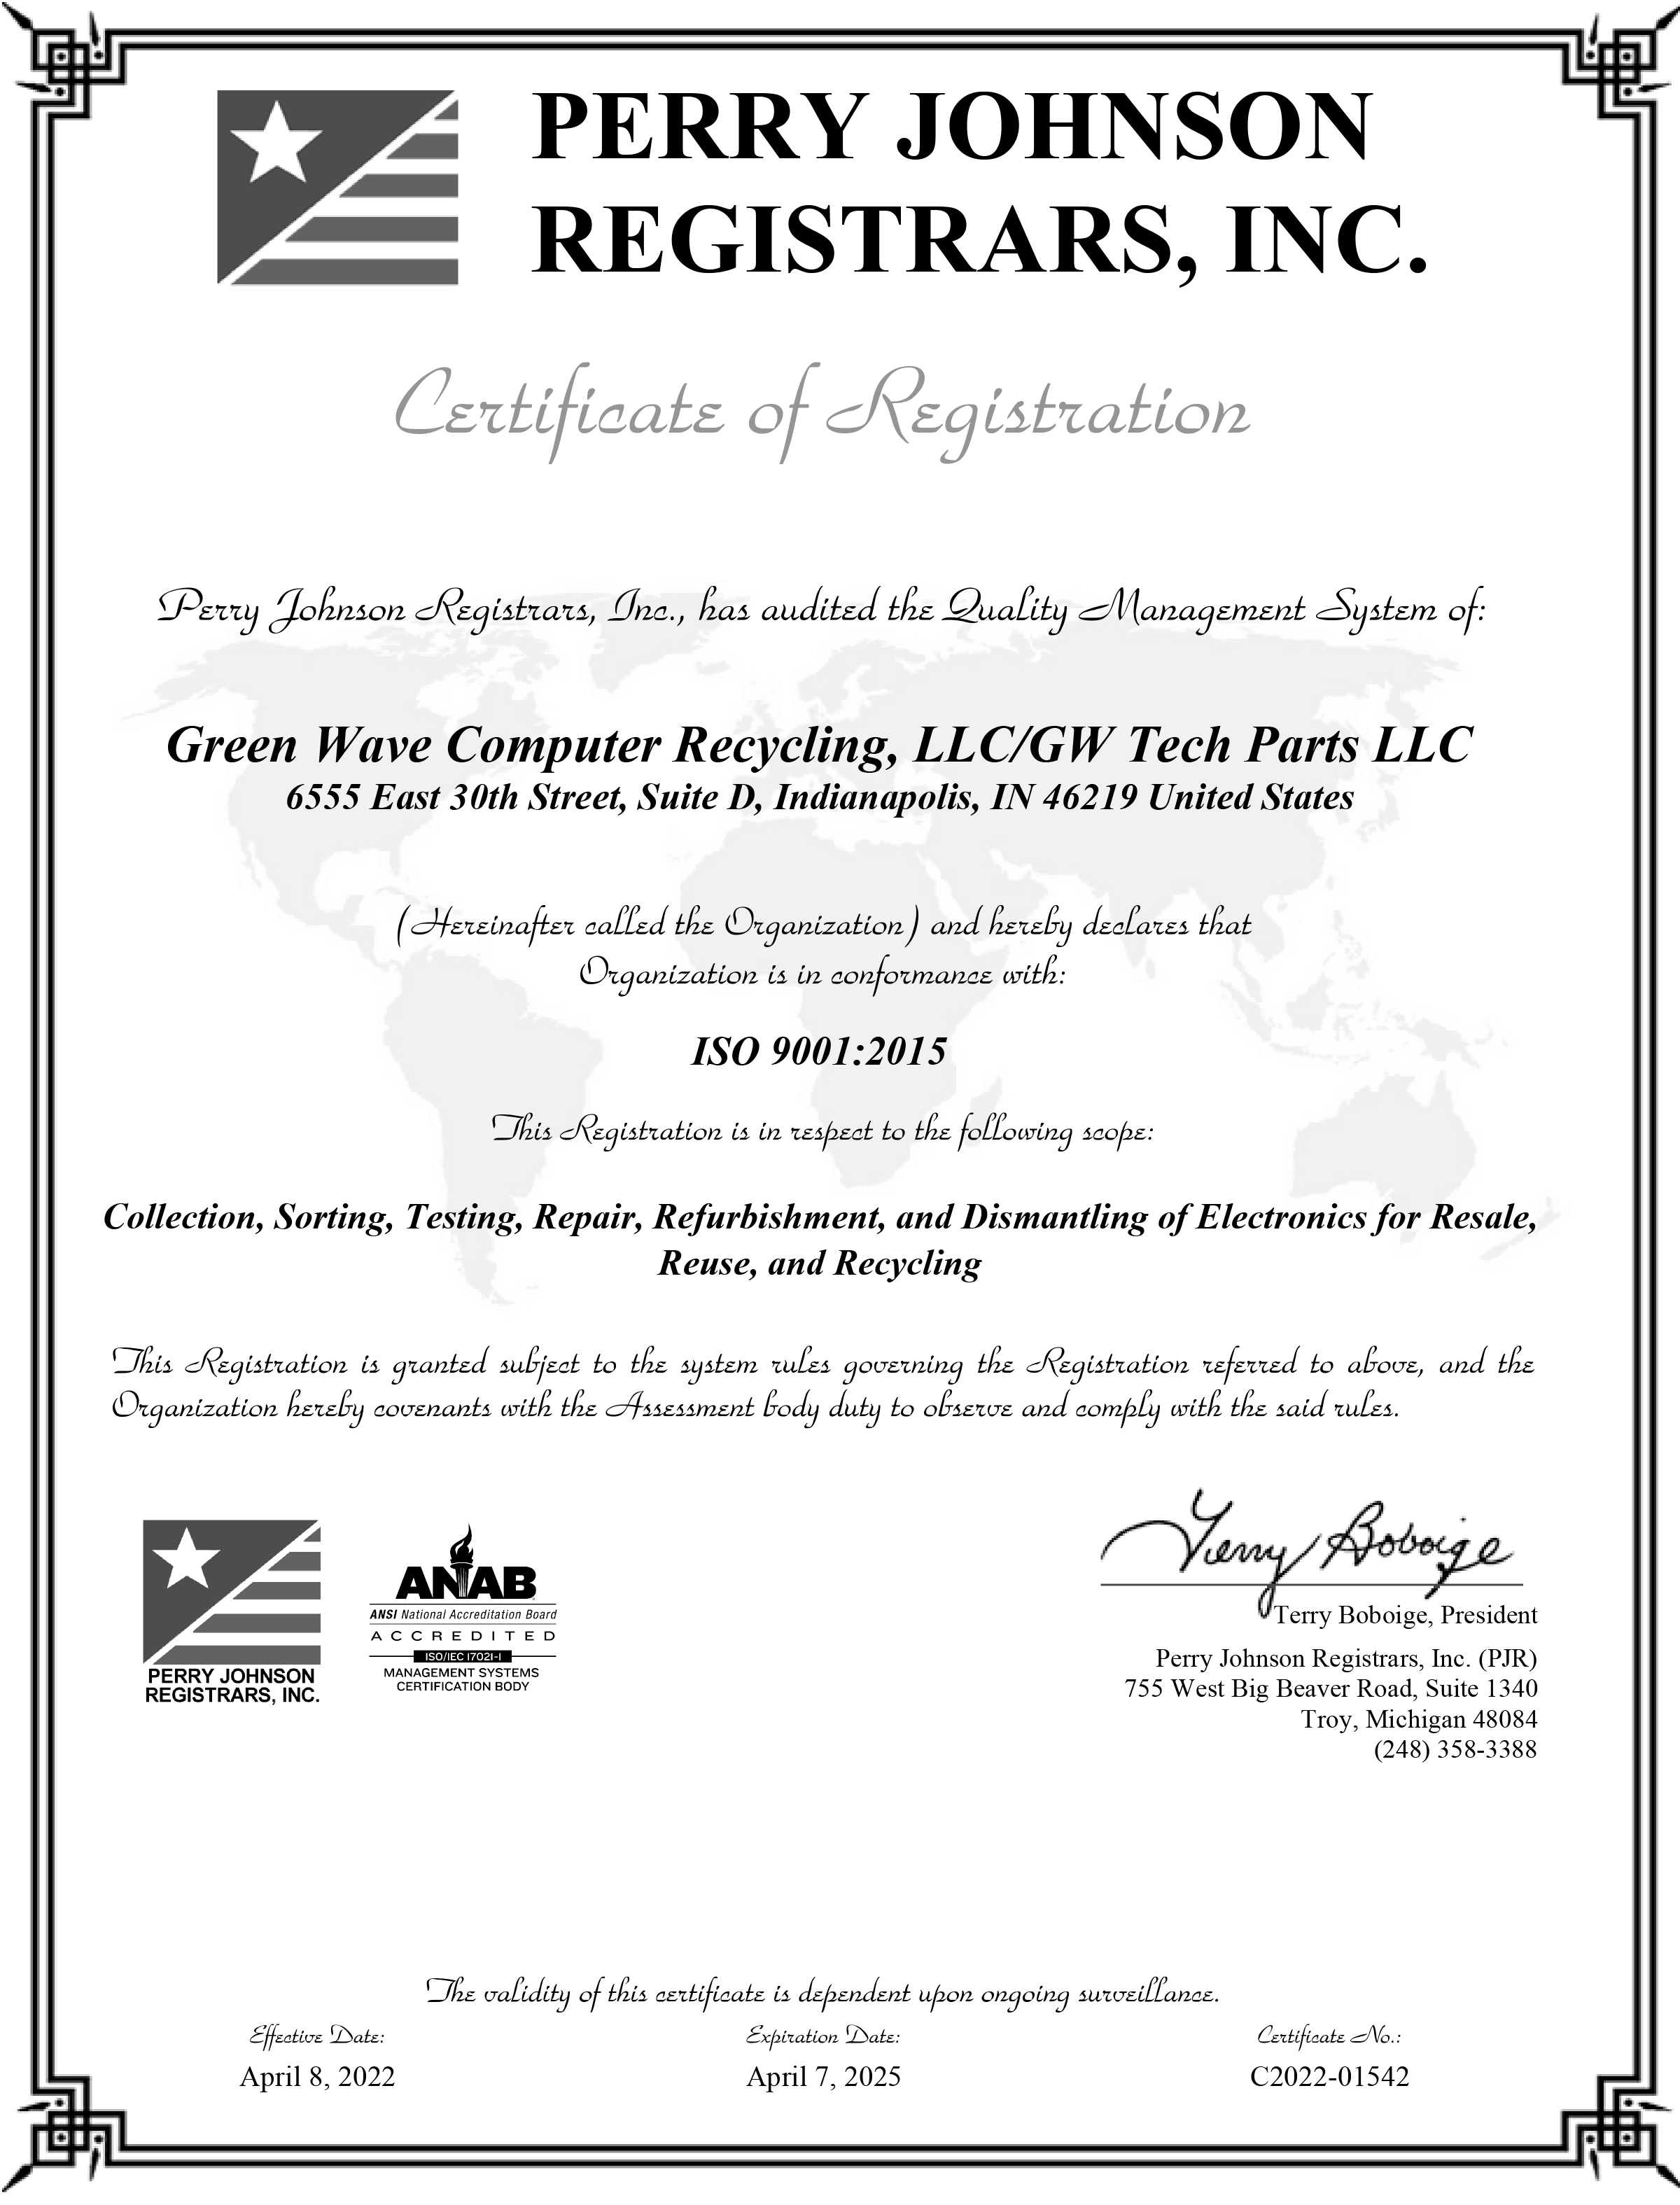 Green Wave Computer Recycling ISO-14 Certification